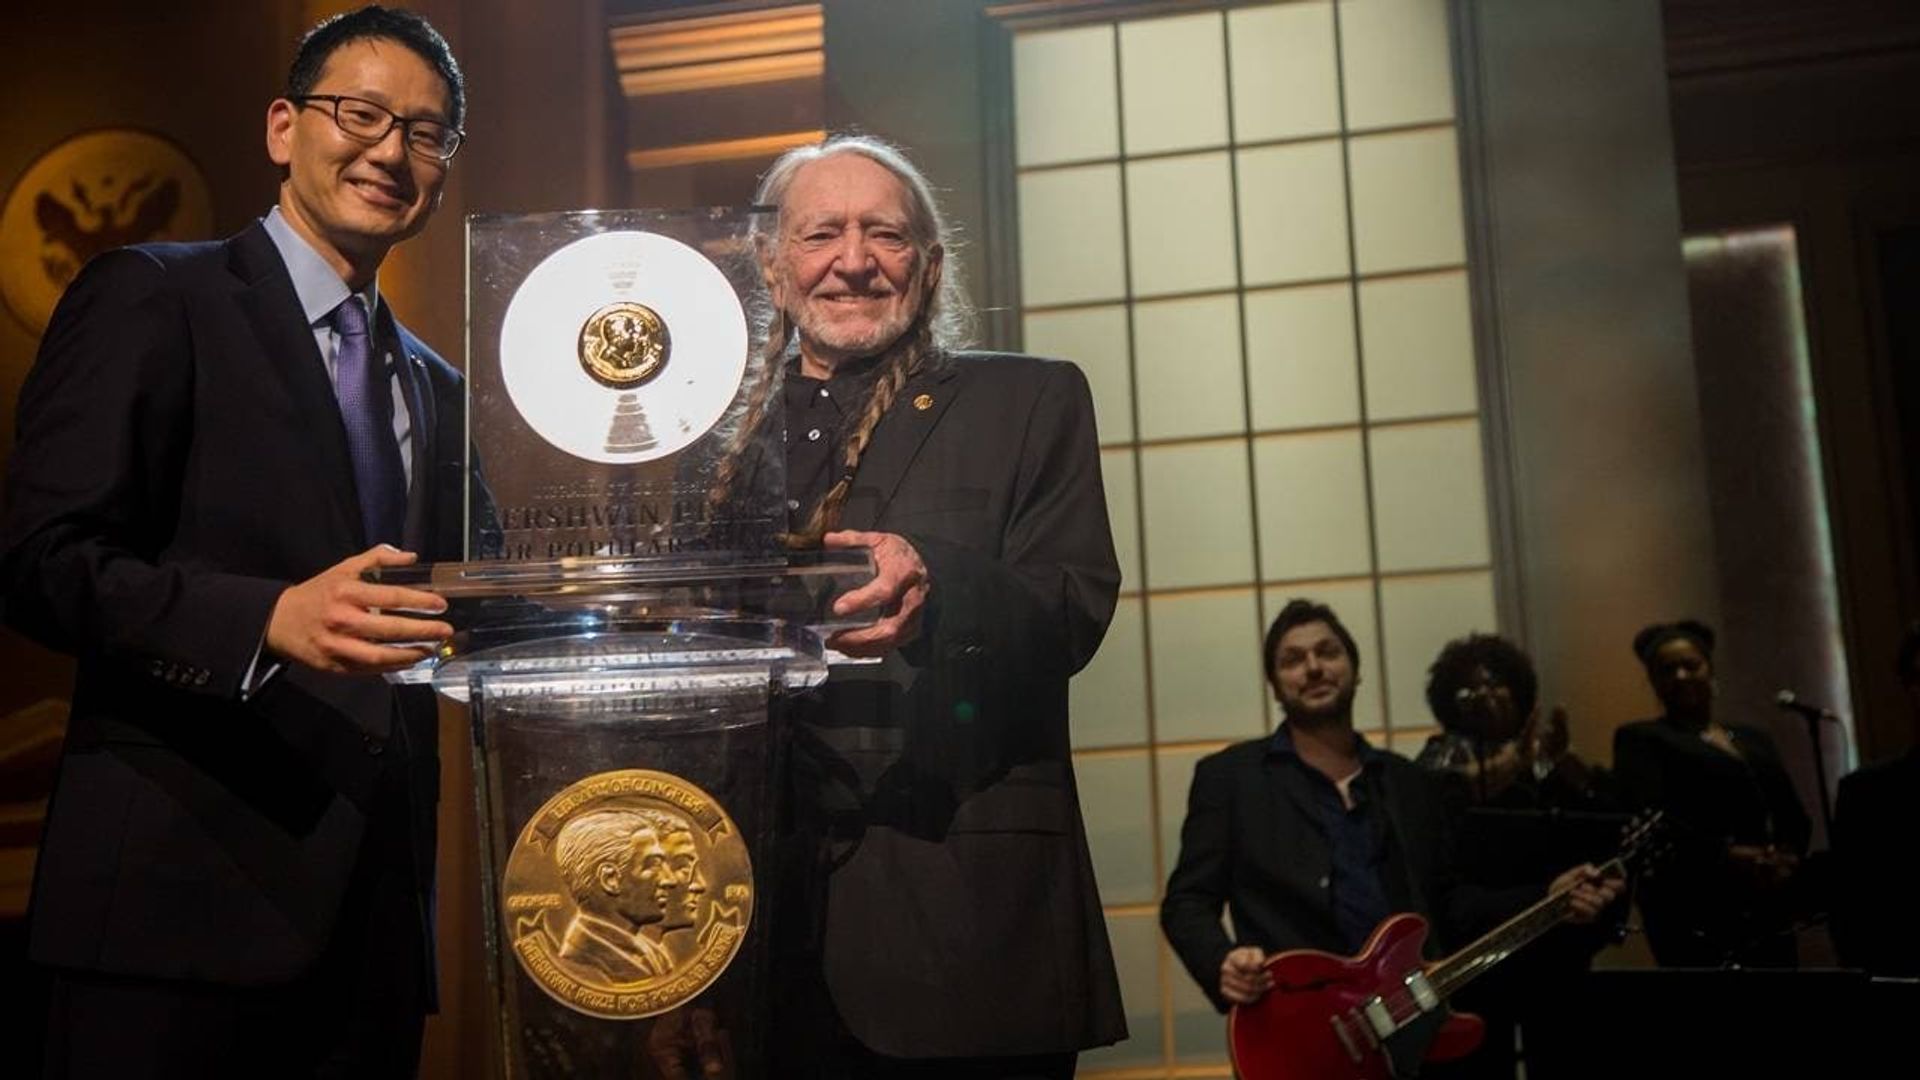 The Library of Congress Gershwin Prize for Popular Song: Willie Nelson background